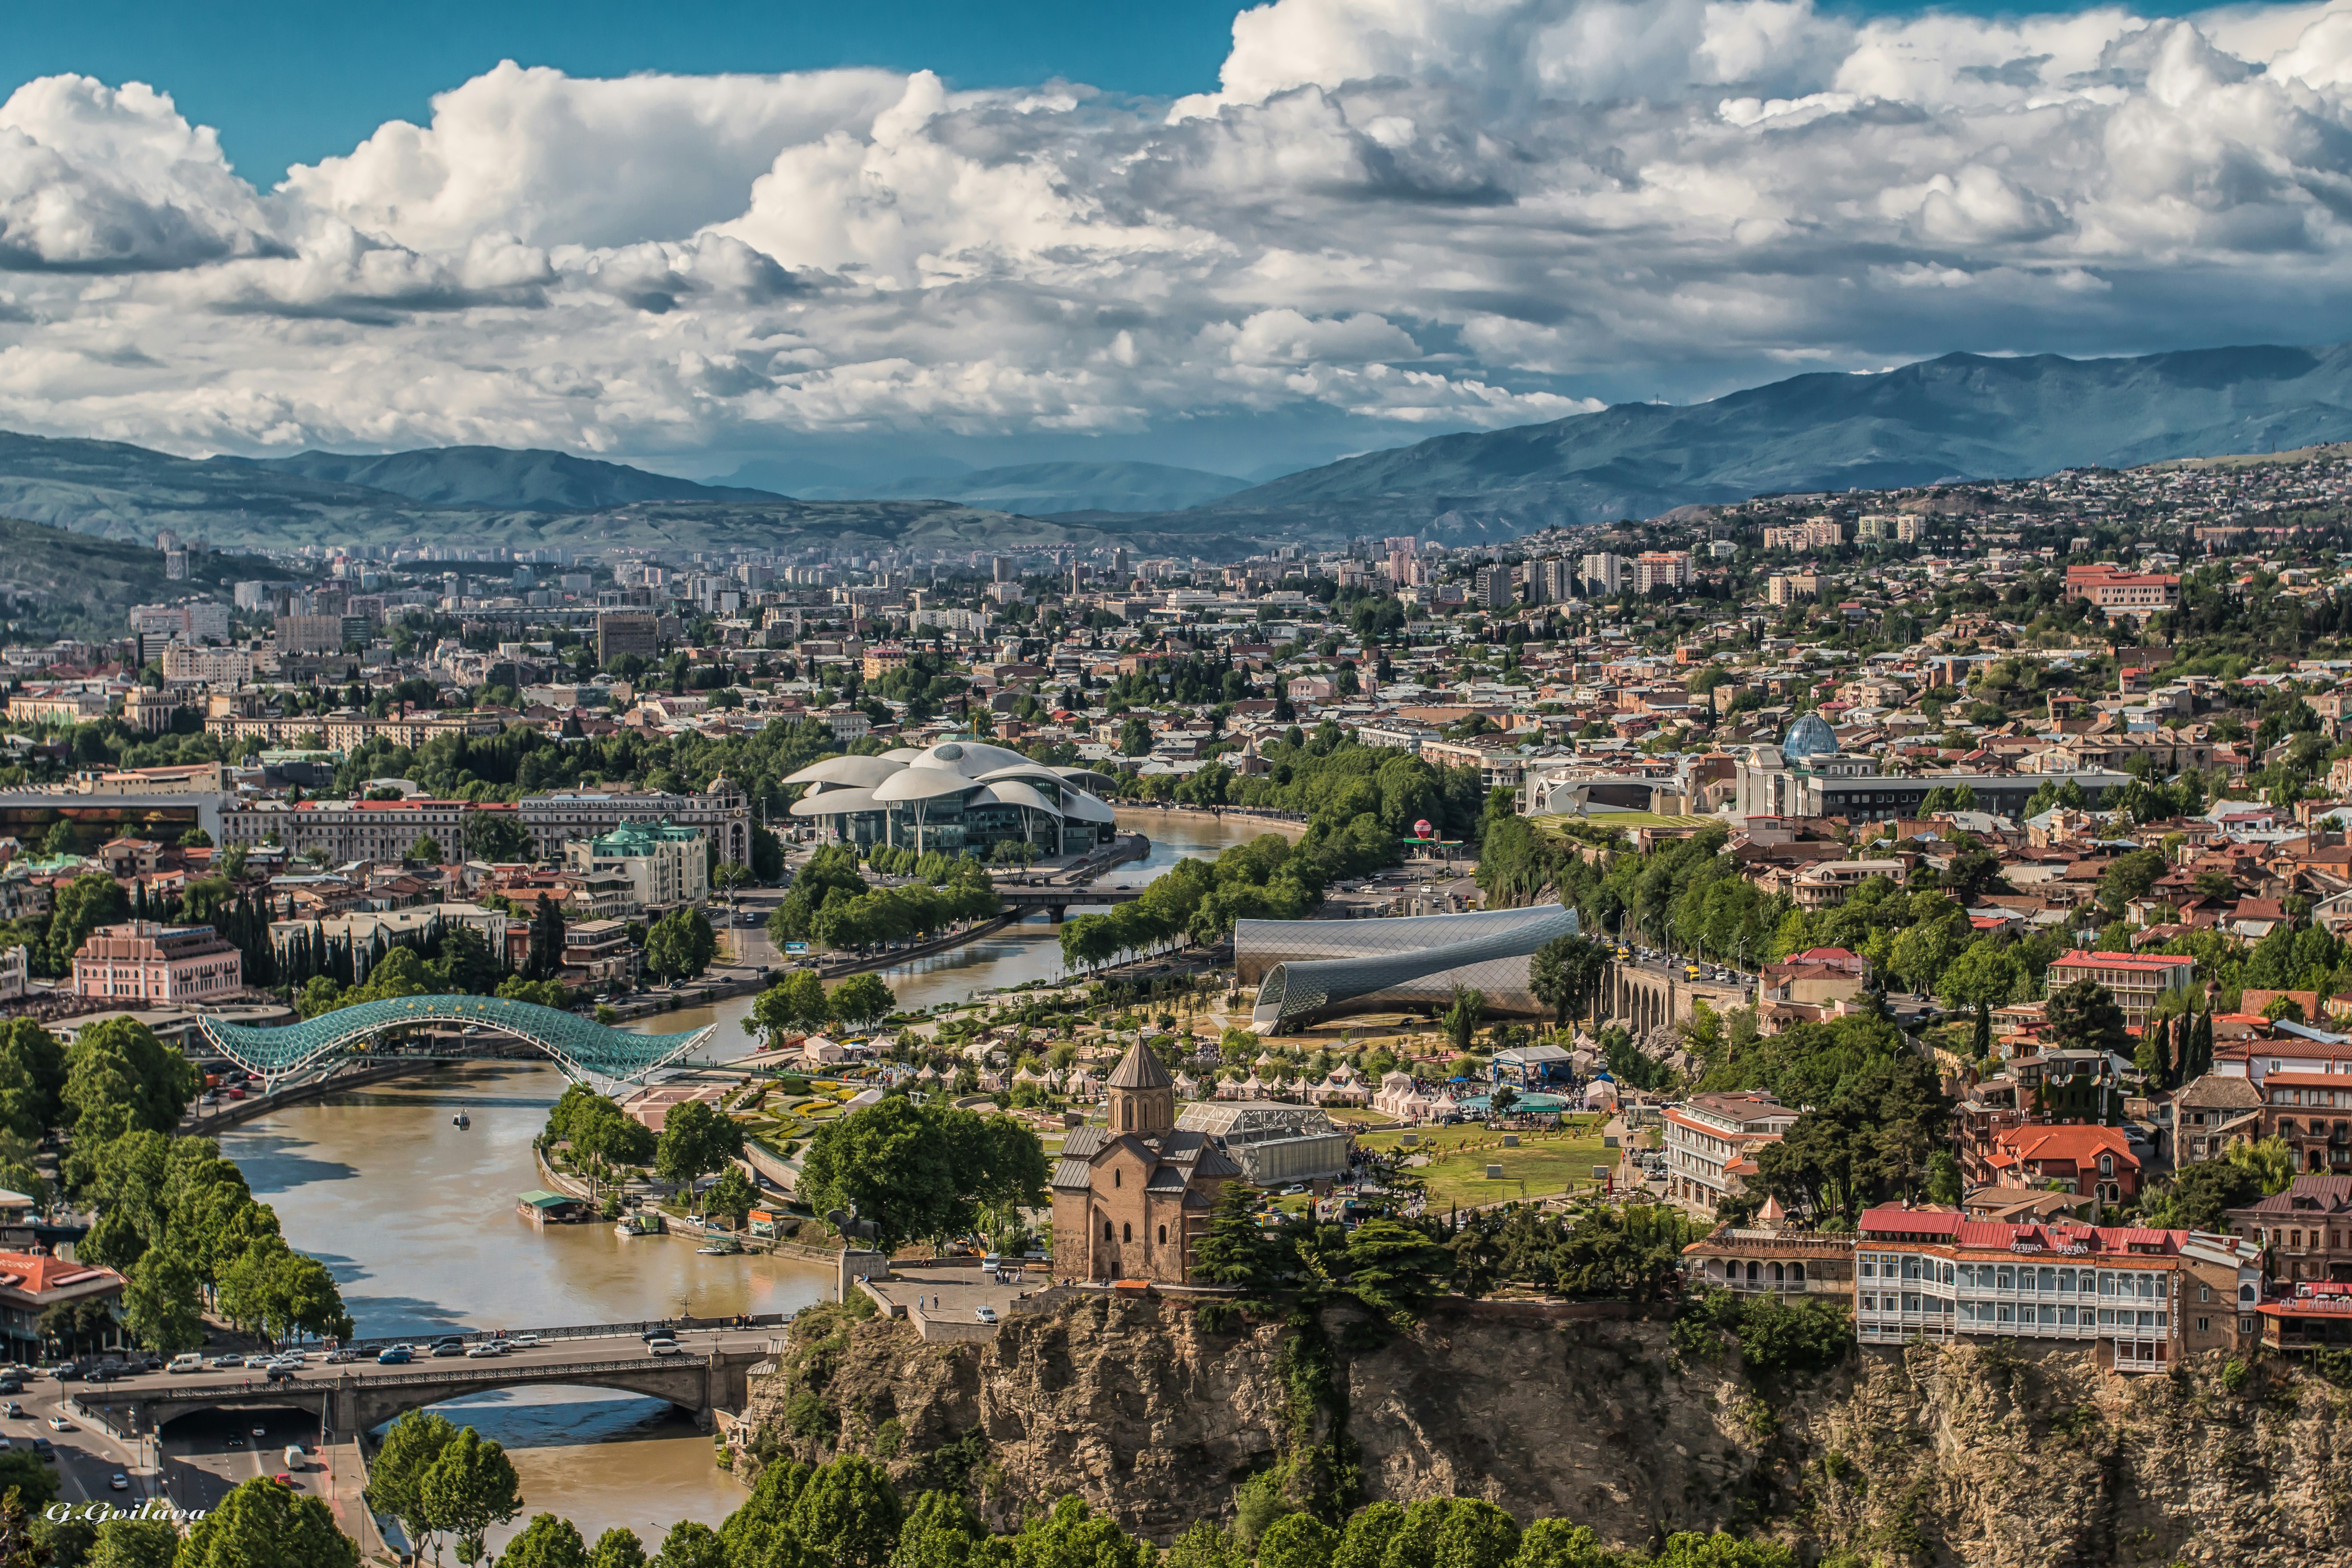 Views of the old city of Tbilisi